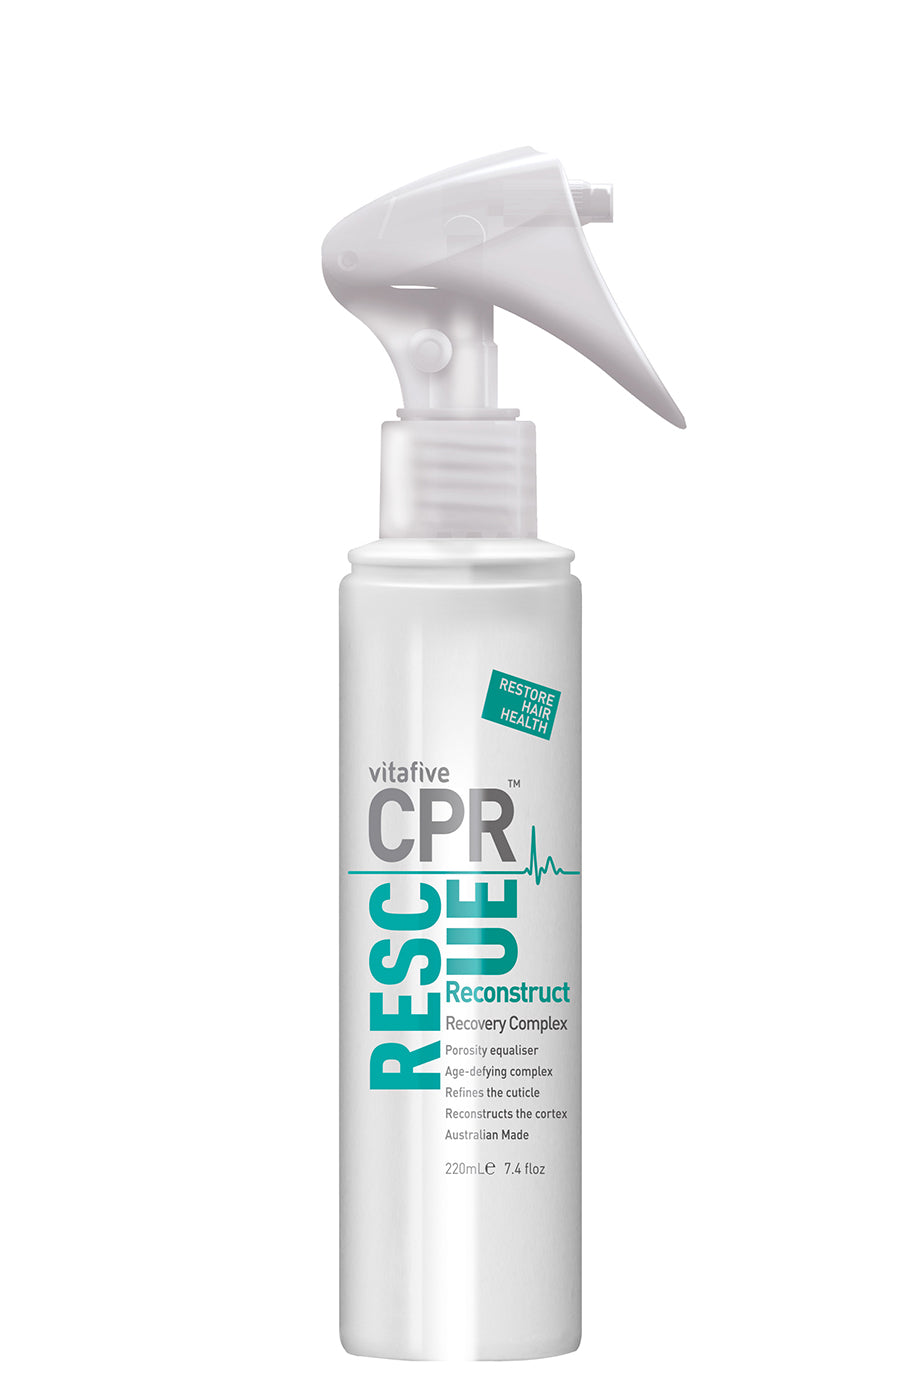 CPR Rescue Reconstruct Spray 220ml